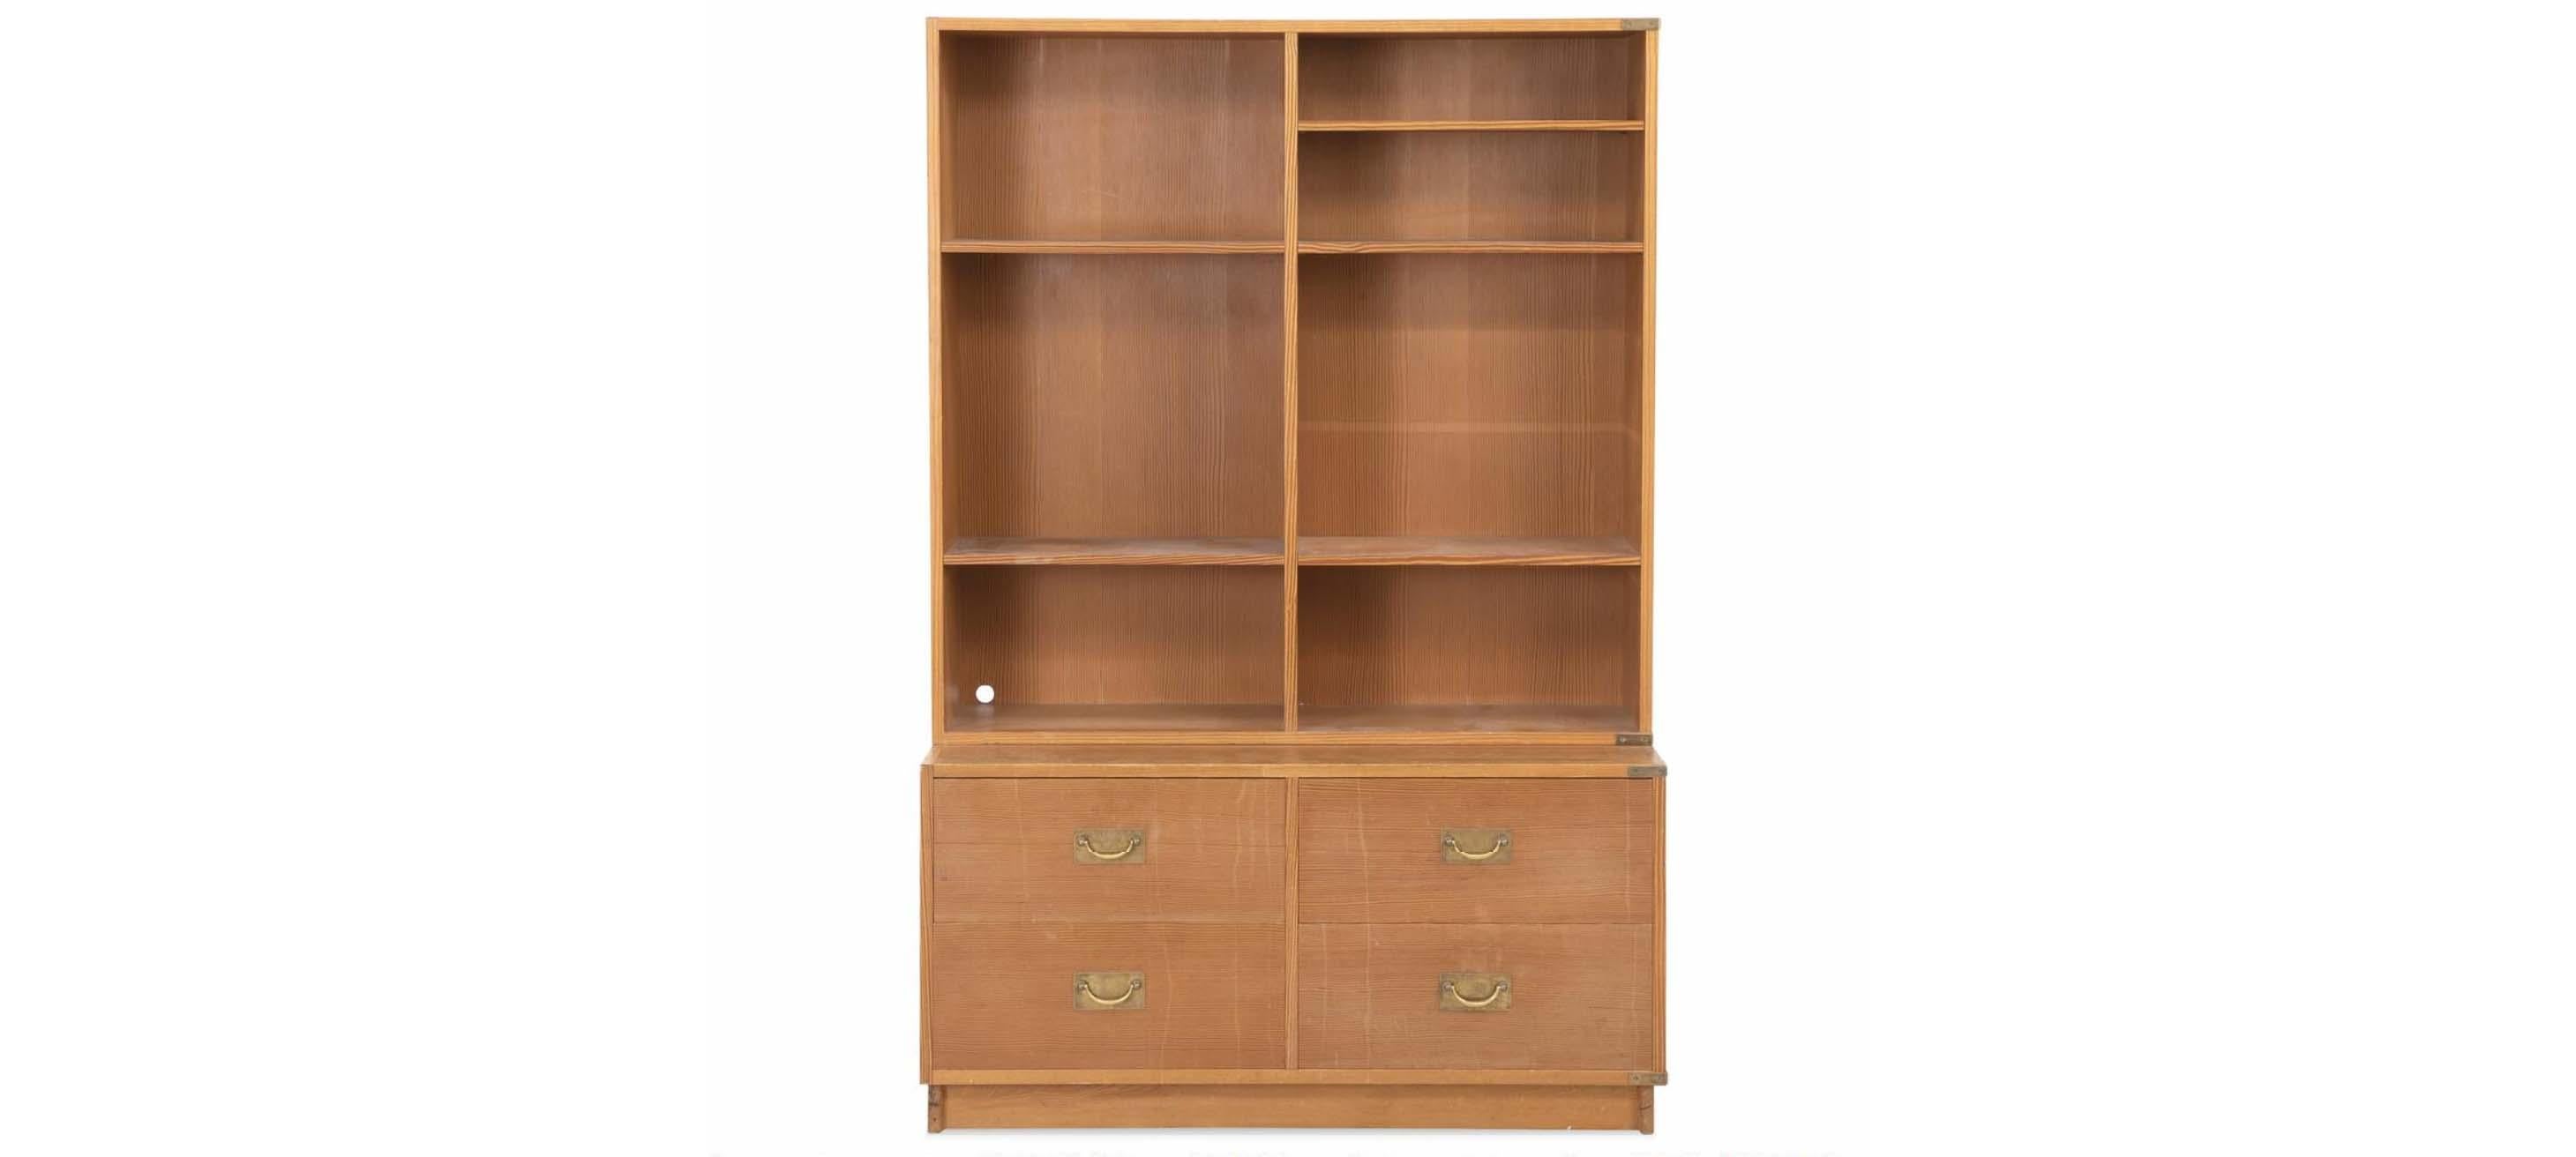 Danish pine wall unit of pitch pine consisting of bookcase and chest of drawers. Handles and fittings of brass. Normal patina due to age and use, including scratches, marks and notches. Hole in back.